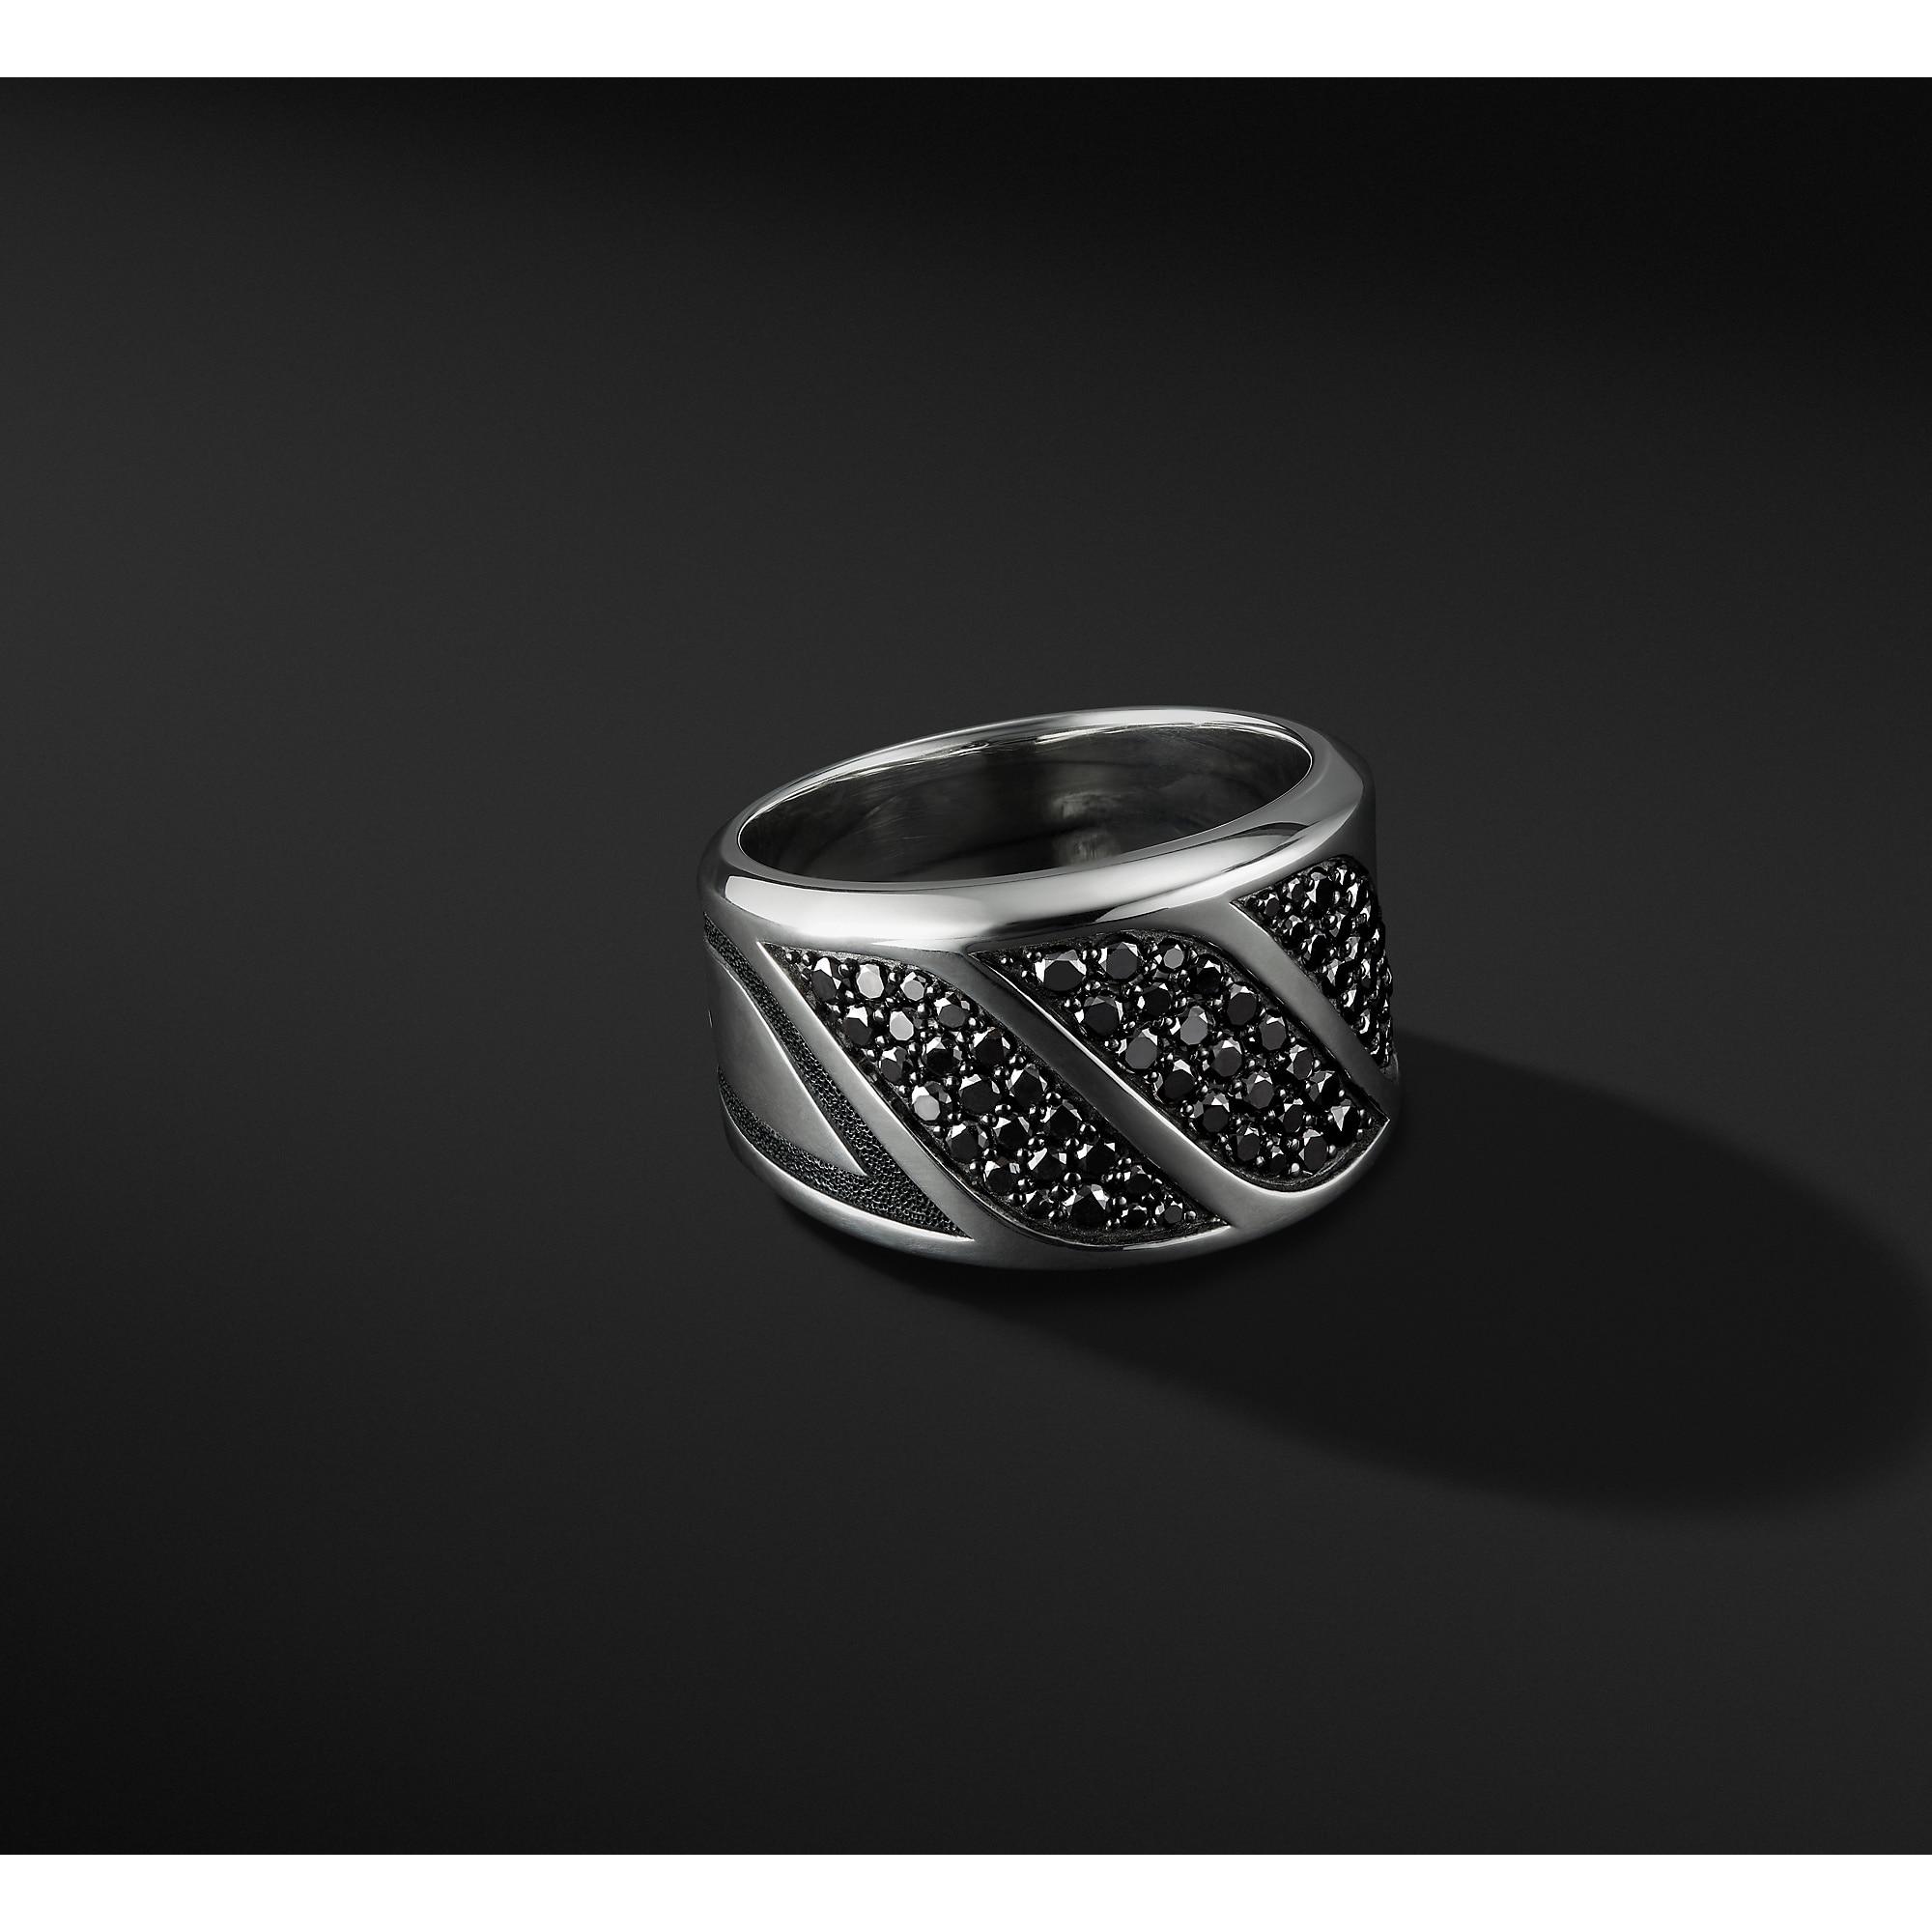 Lyst David Yurman Graphic Cable Band Ring With Black Diamonds in